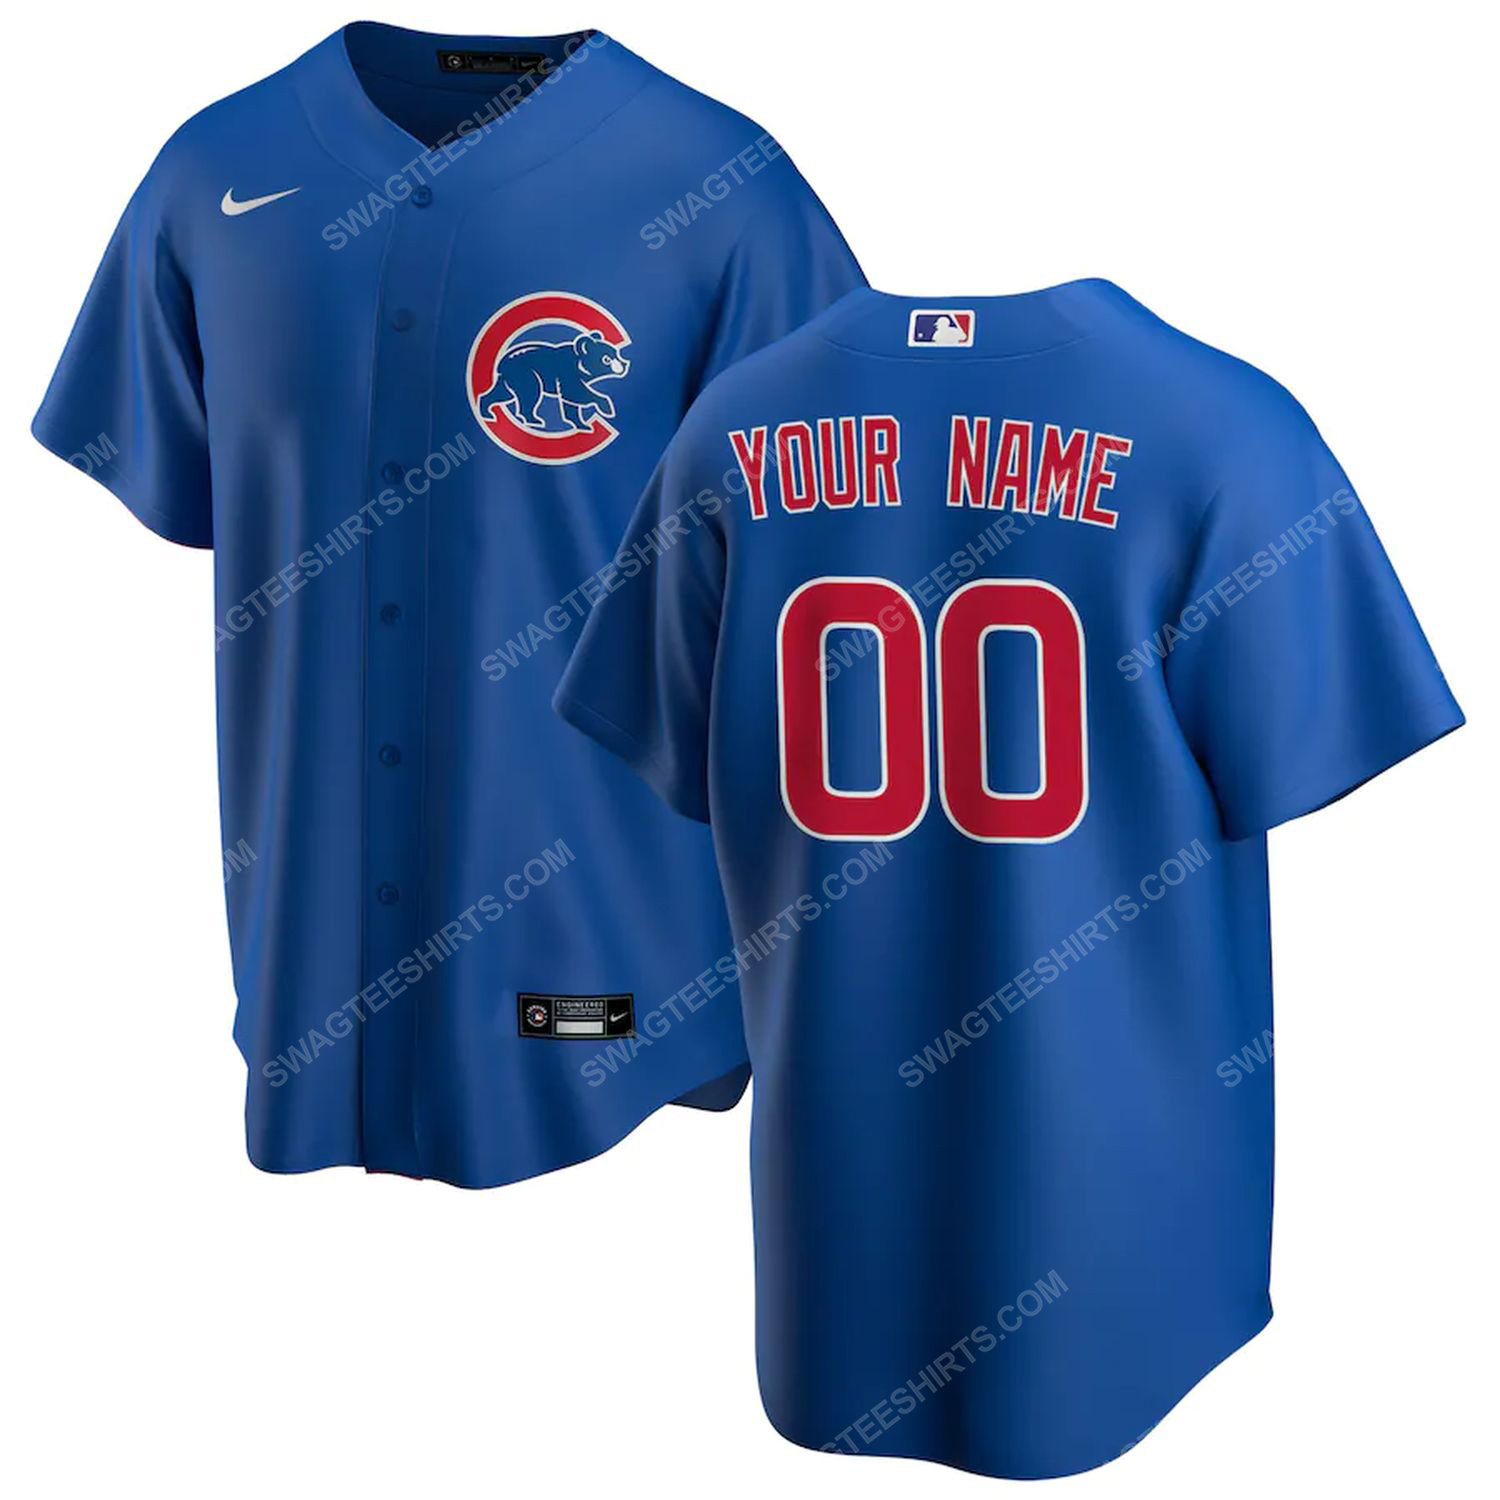 [special edition] Personalized mlb chicago cubs baseball jersey – maria